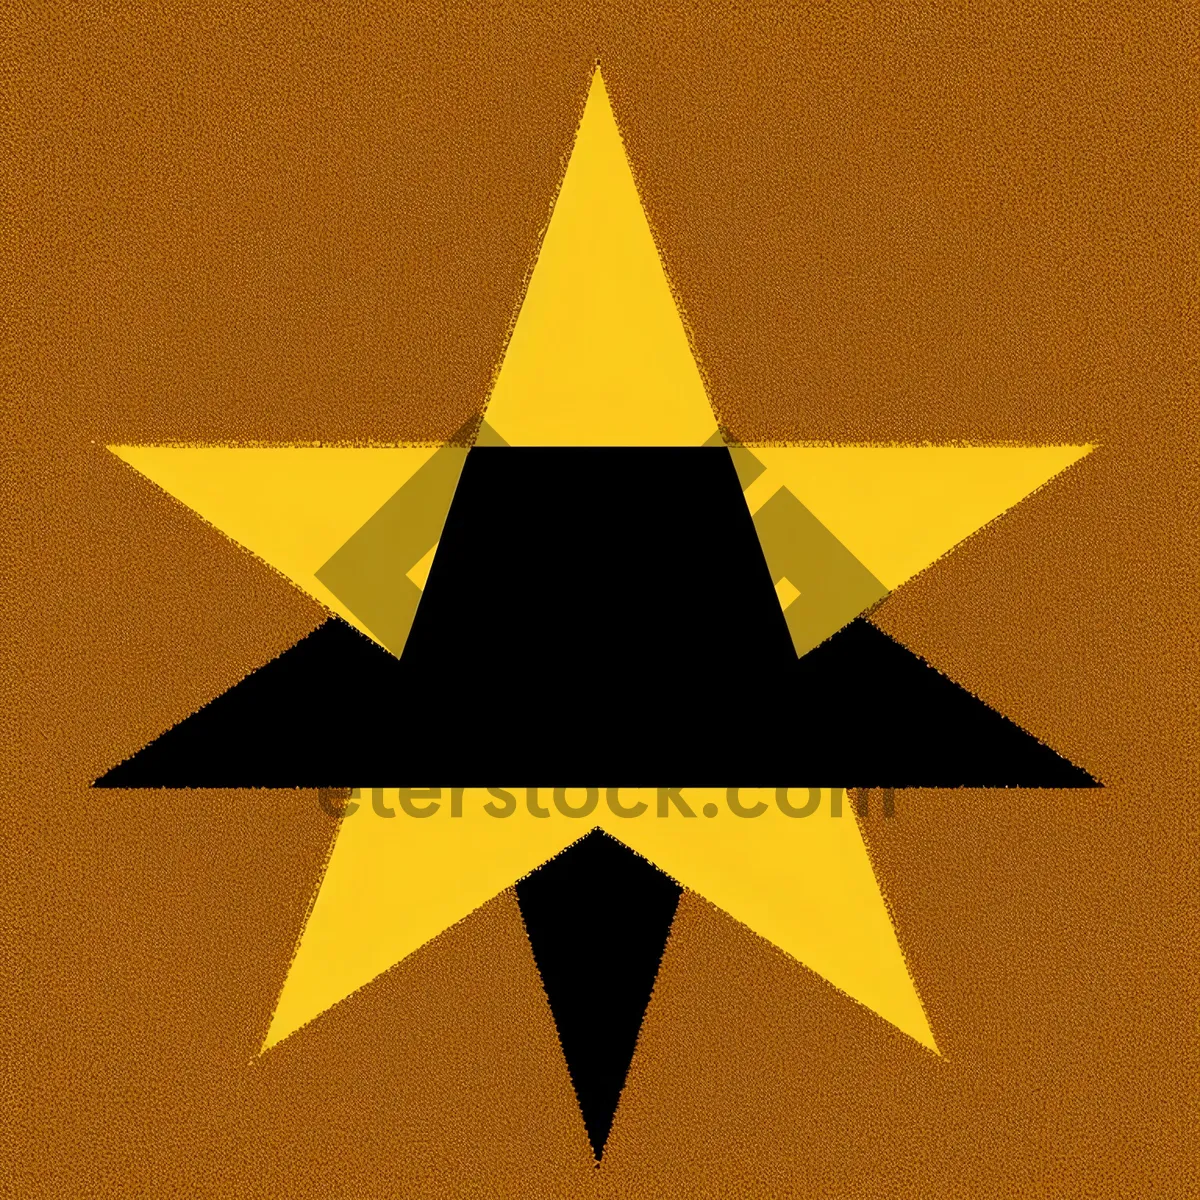 Picture of Hippie-inspired Pyramid Graphic Design with Reformist Symbol